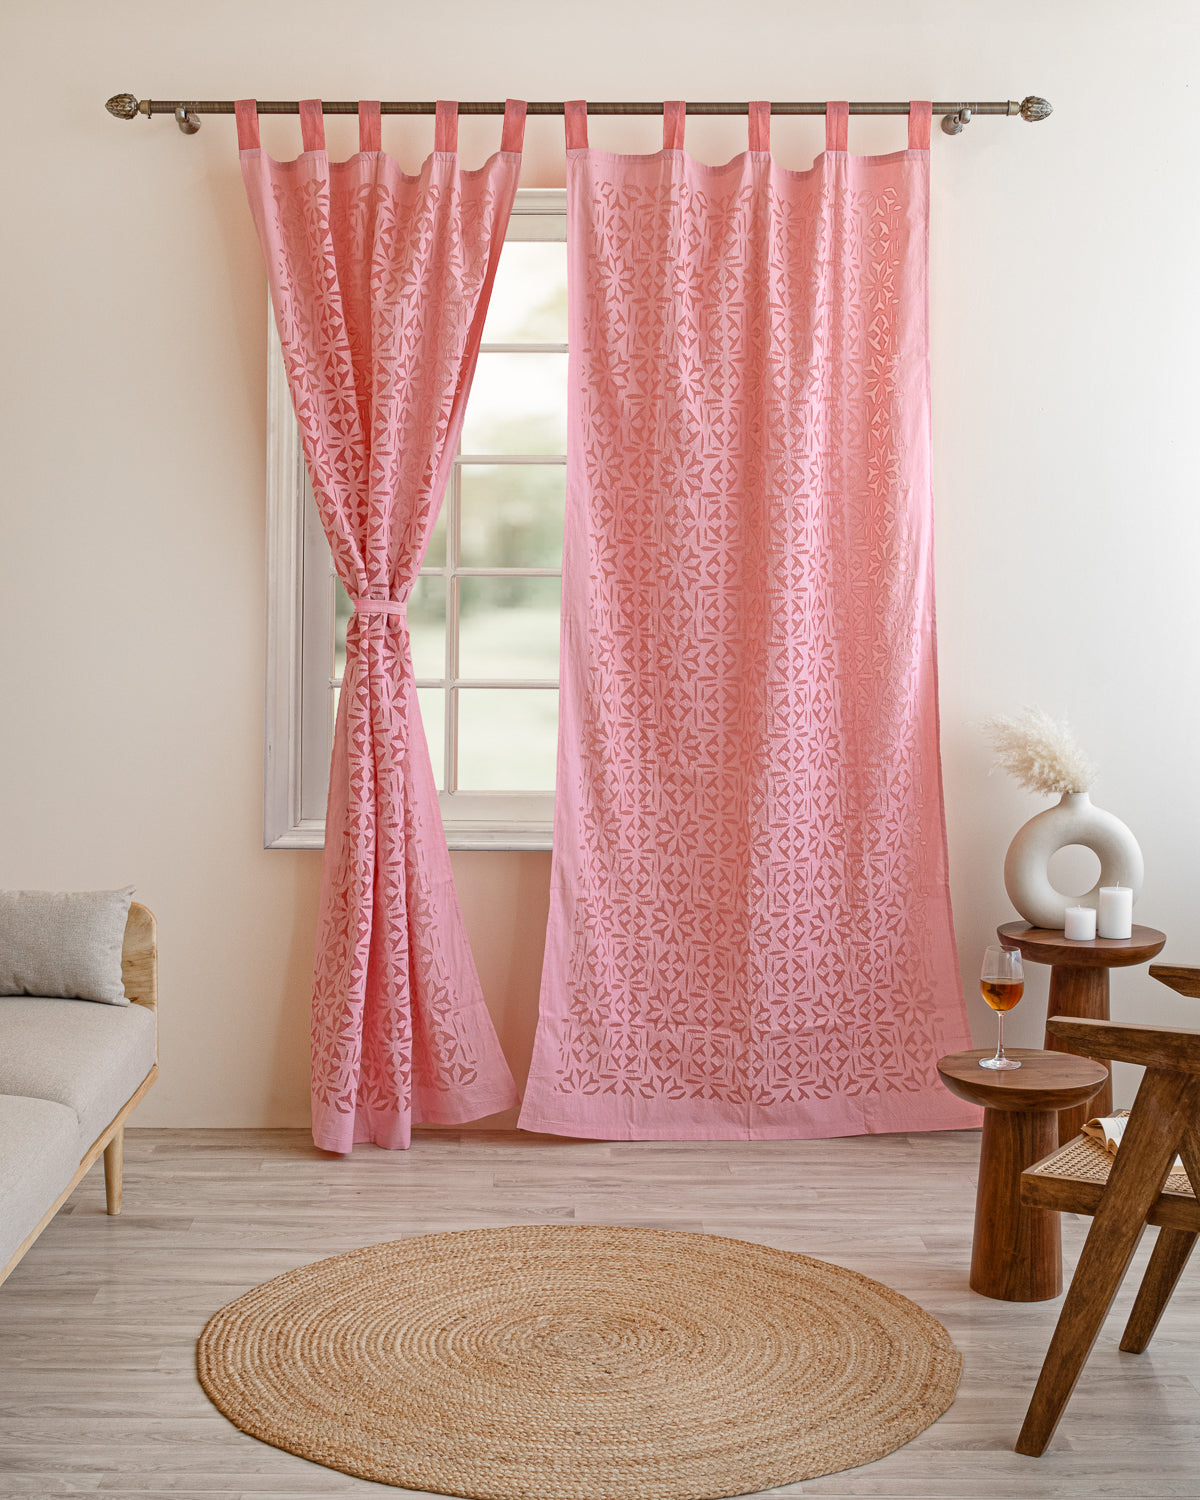 Curtains Applique Full Work Pattern, Baby Pink